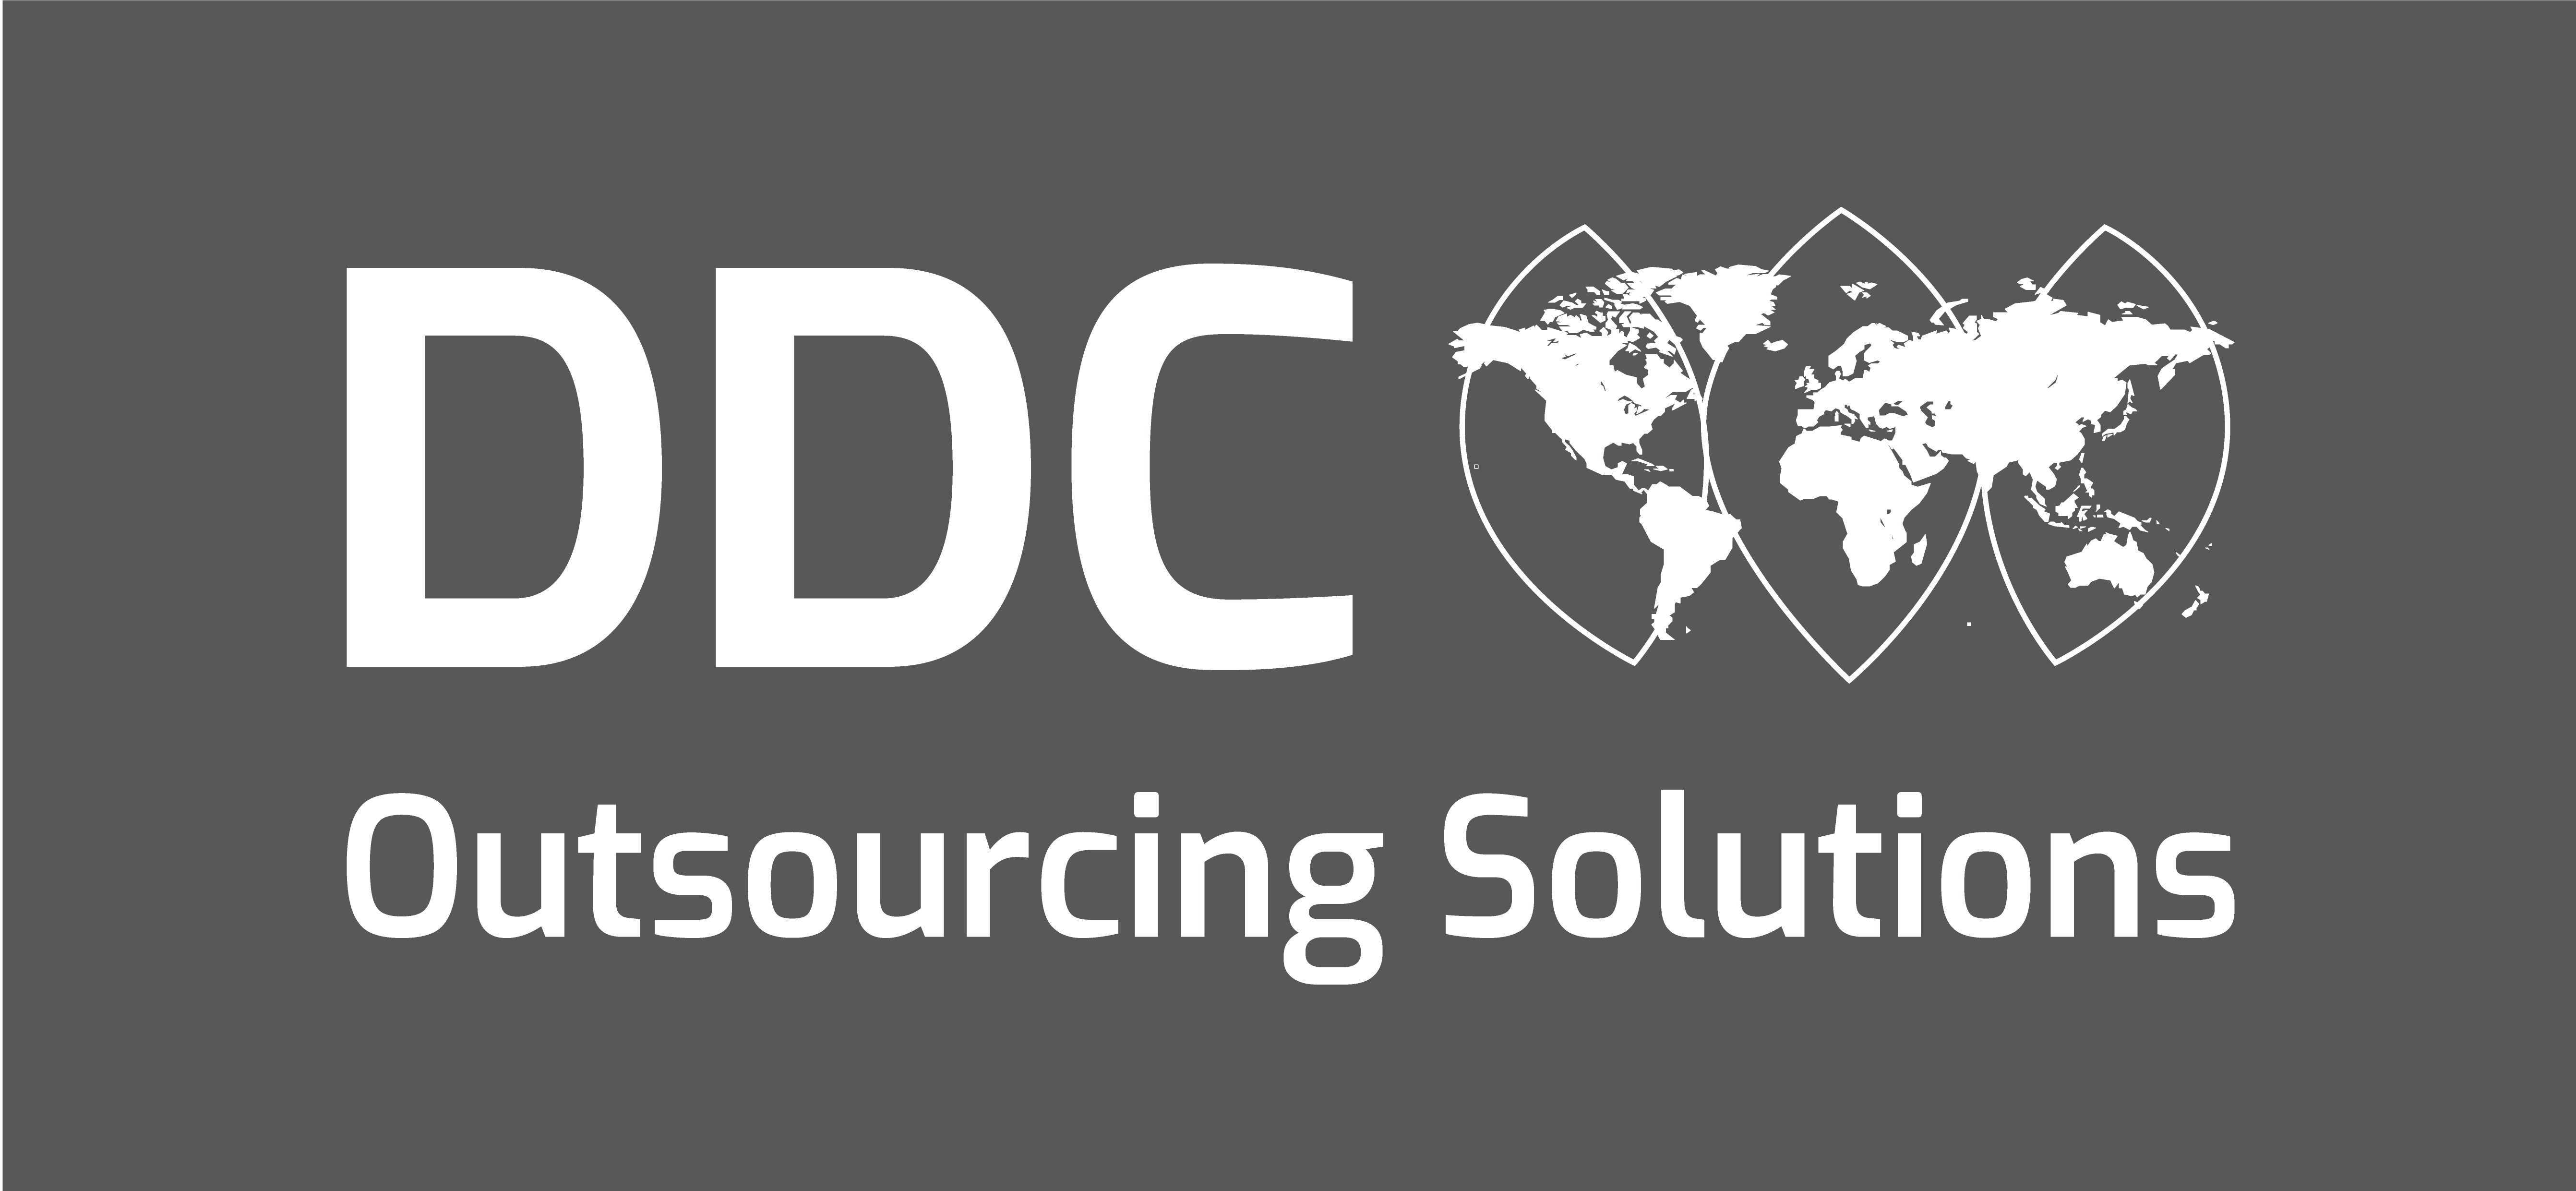 DDC Outsourcing